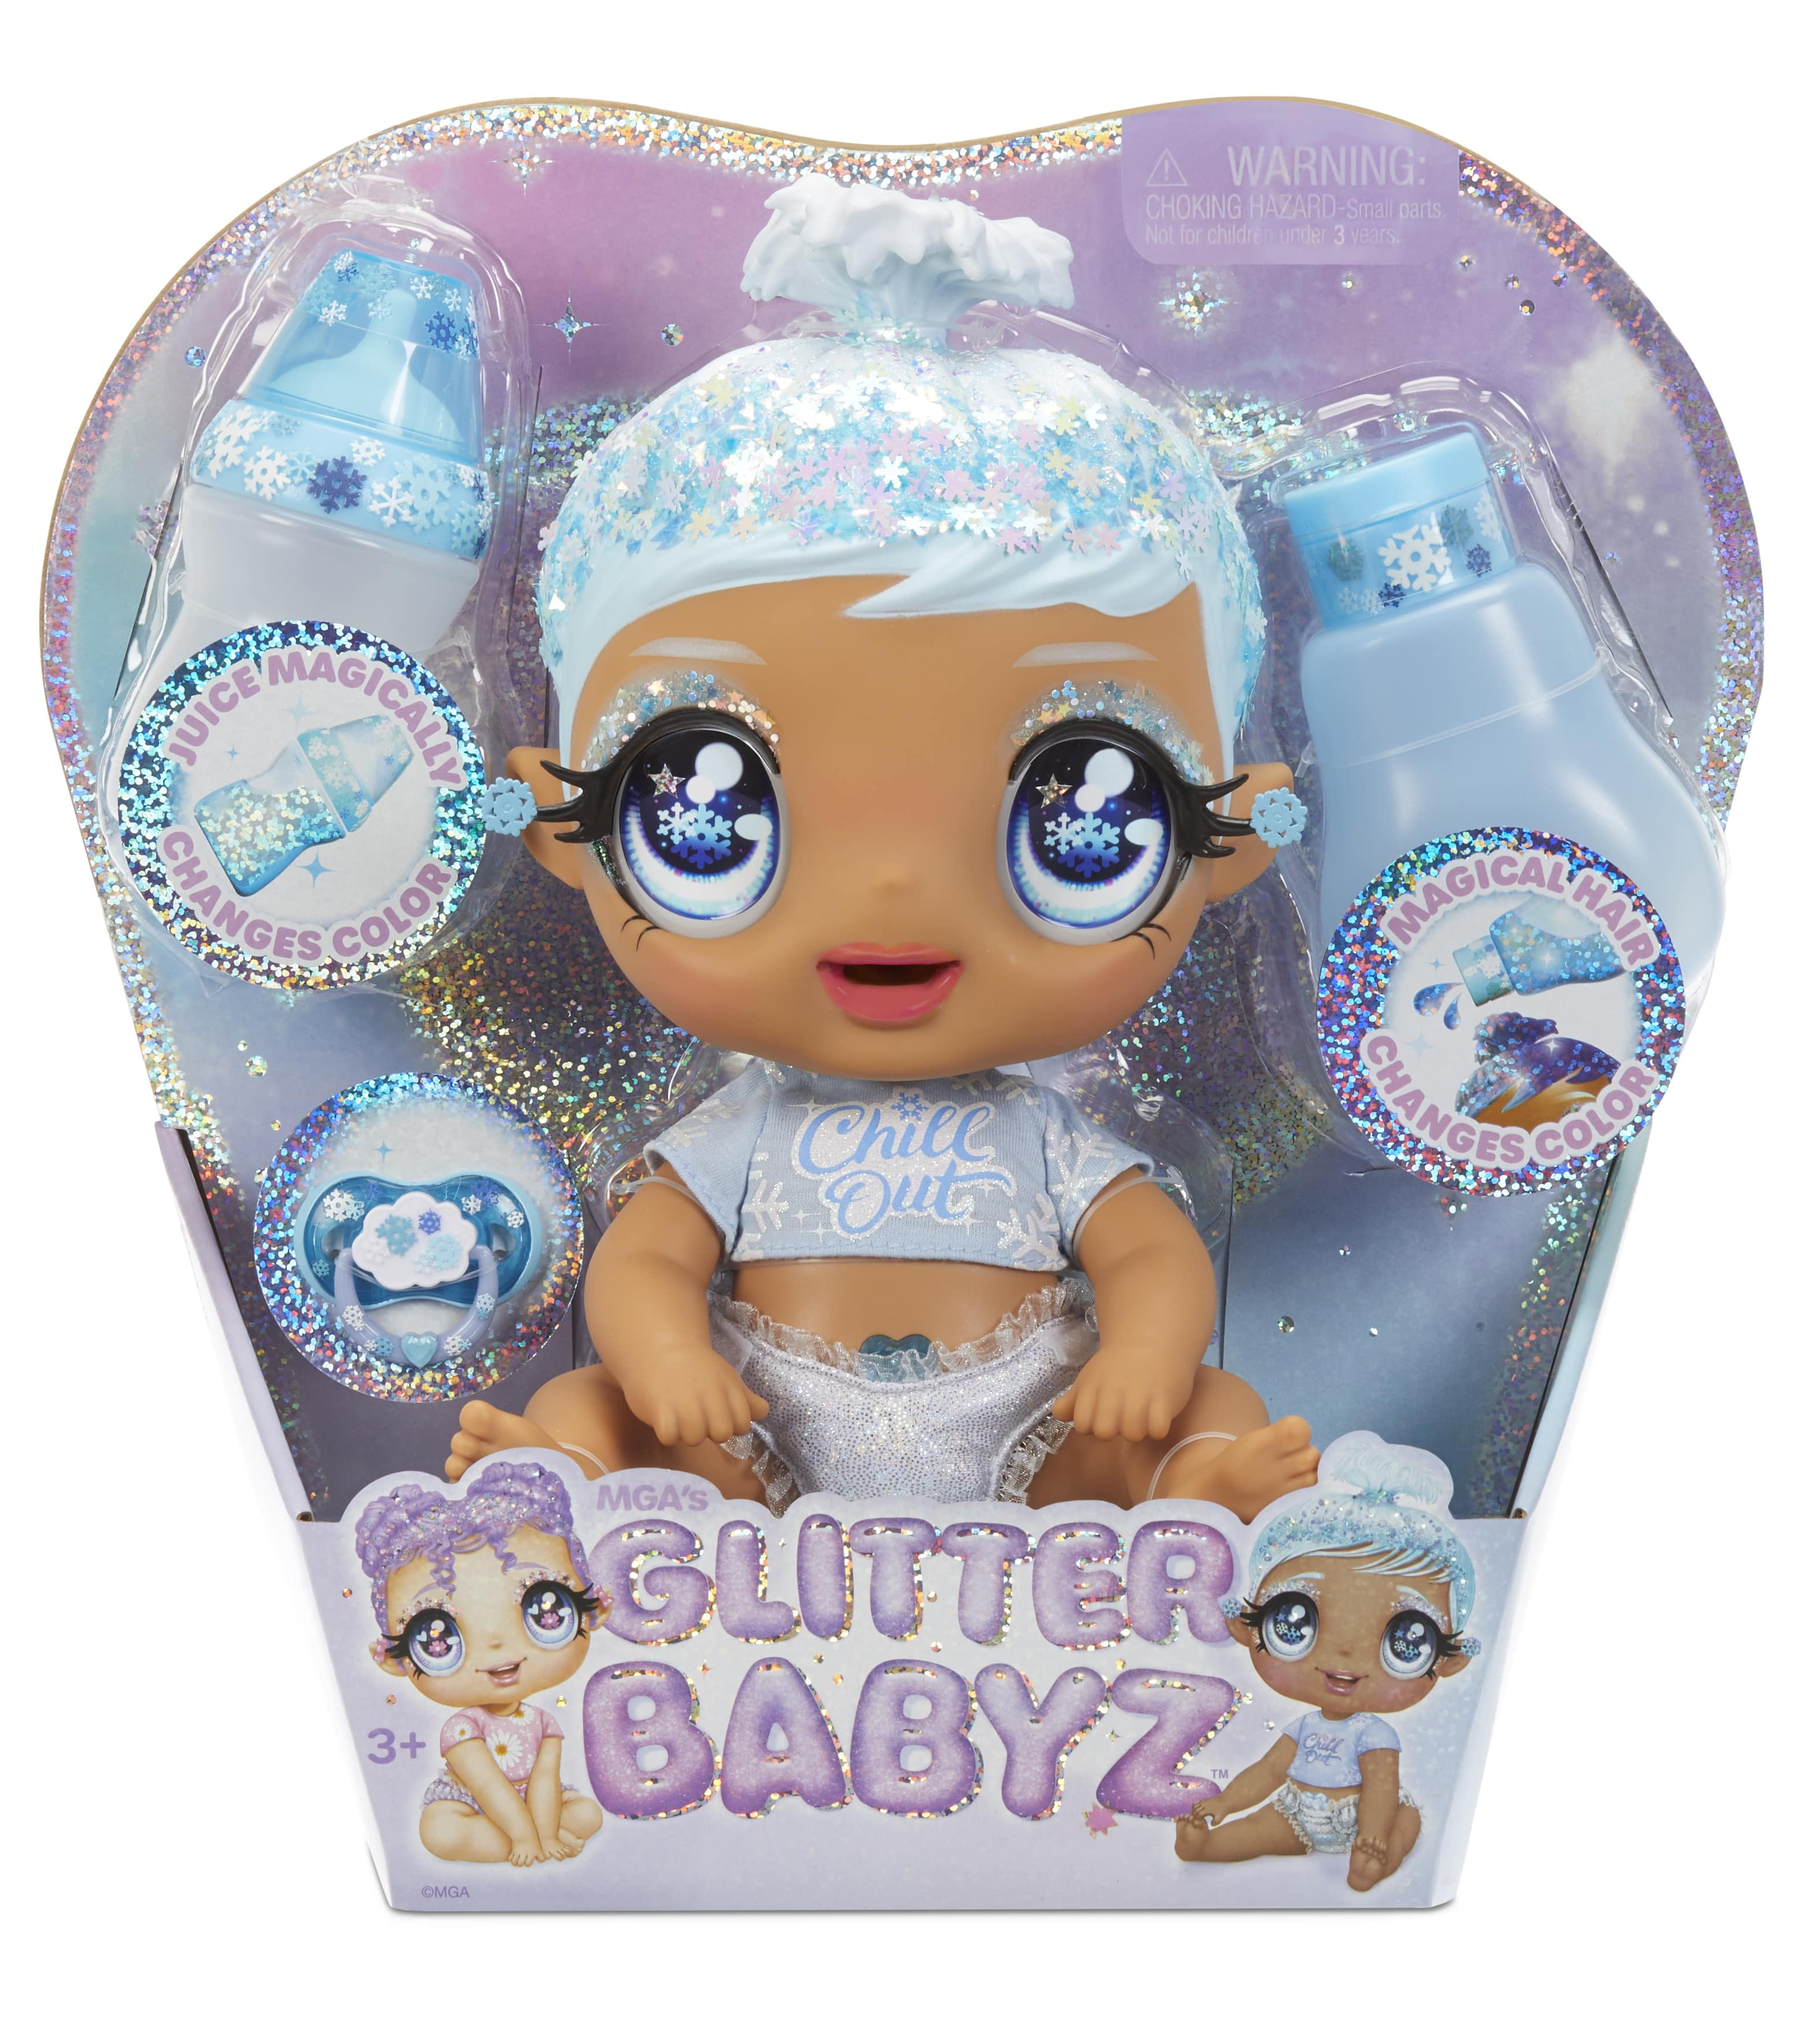 nacimiento oficina postal Dibujar Glitter Babyz January Snowflake Baby (Blue) with 3 Magical Color Changes,  Gift Toy for Girls Ages 3 4 5+ - Walmart.com